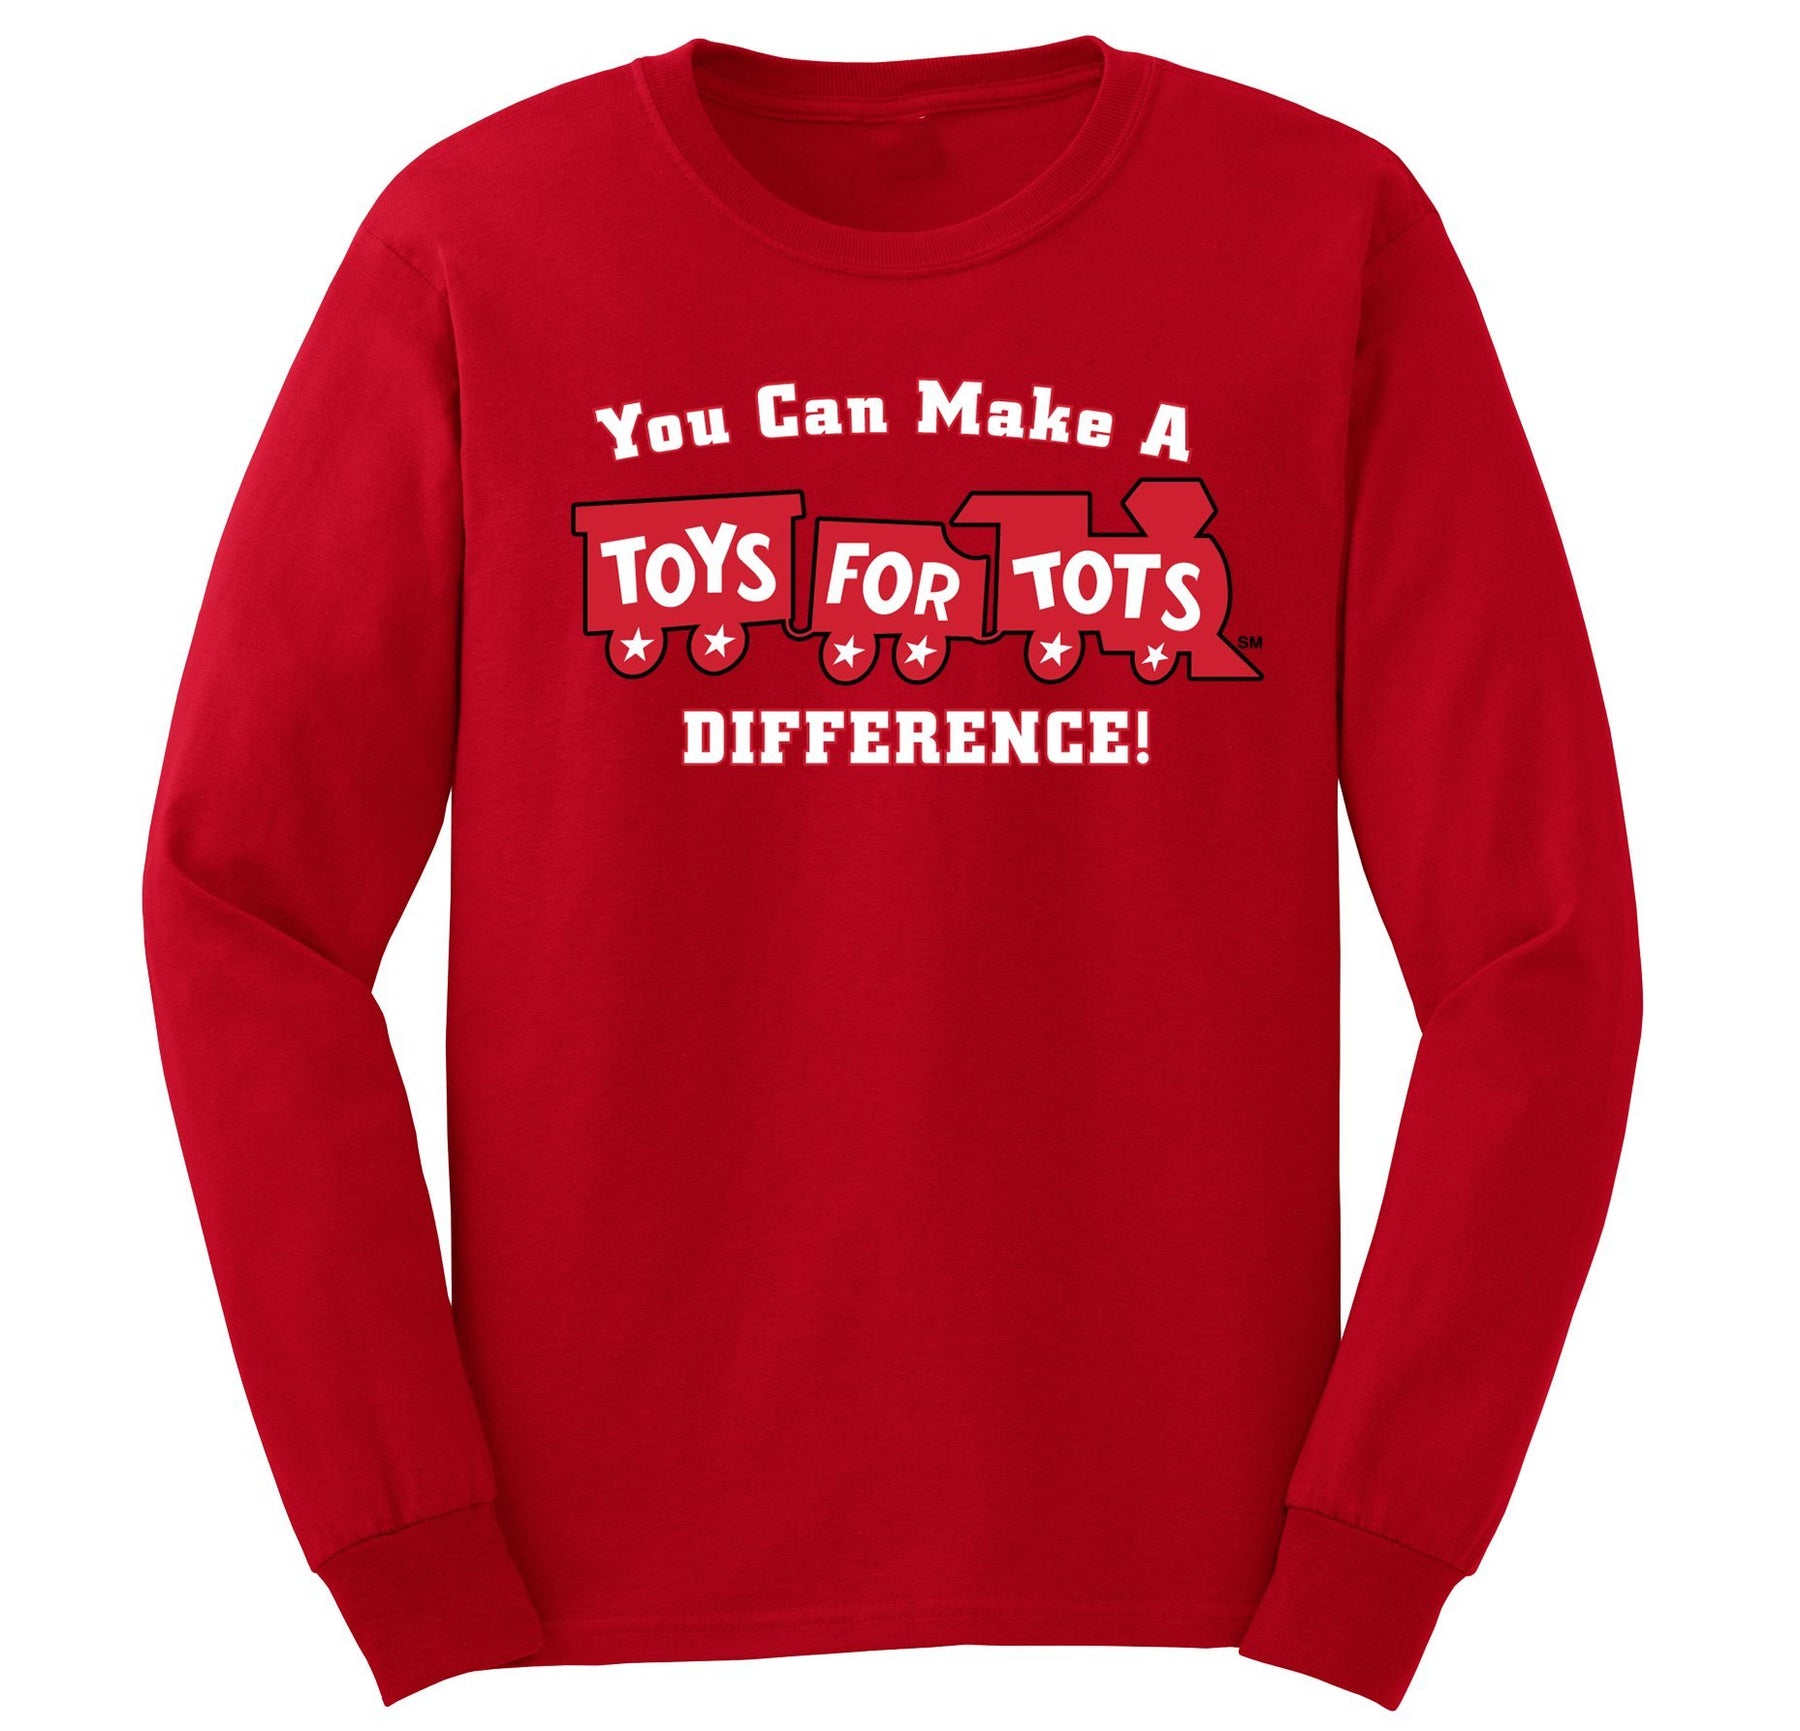 Make a Difference TFT Train Long Sleeve TFT Shirt marinecorpsdirecttft S RED 